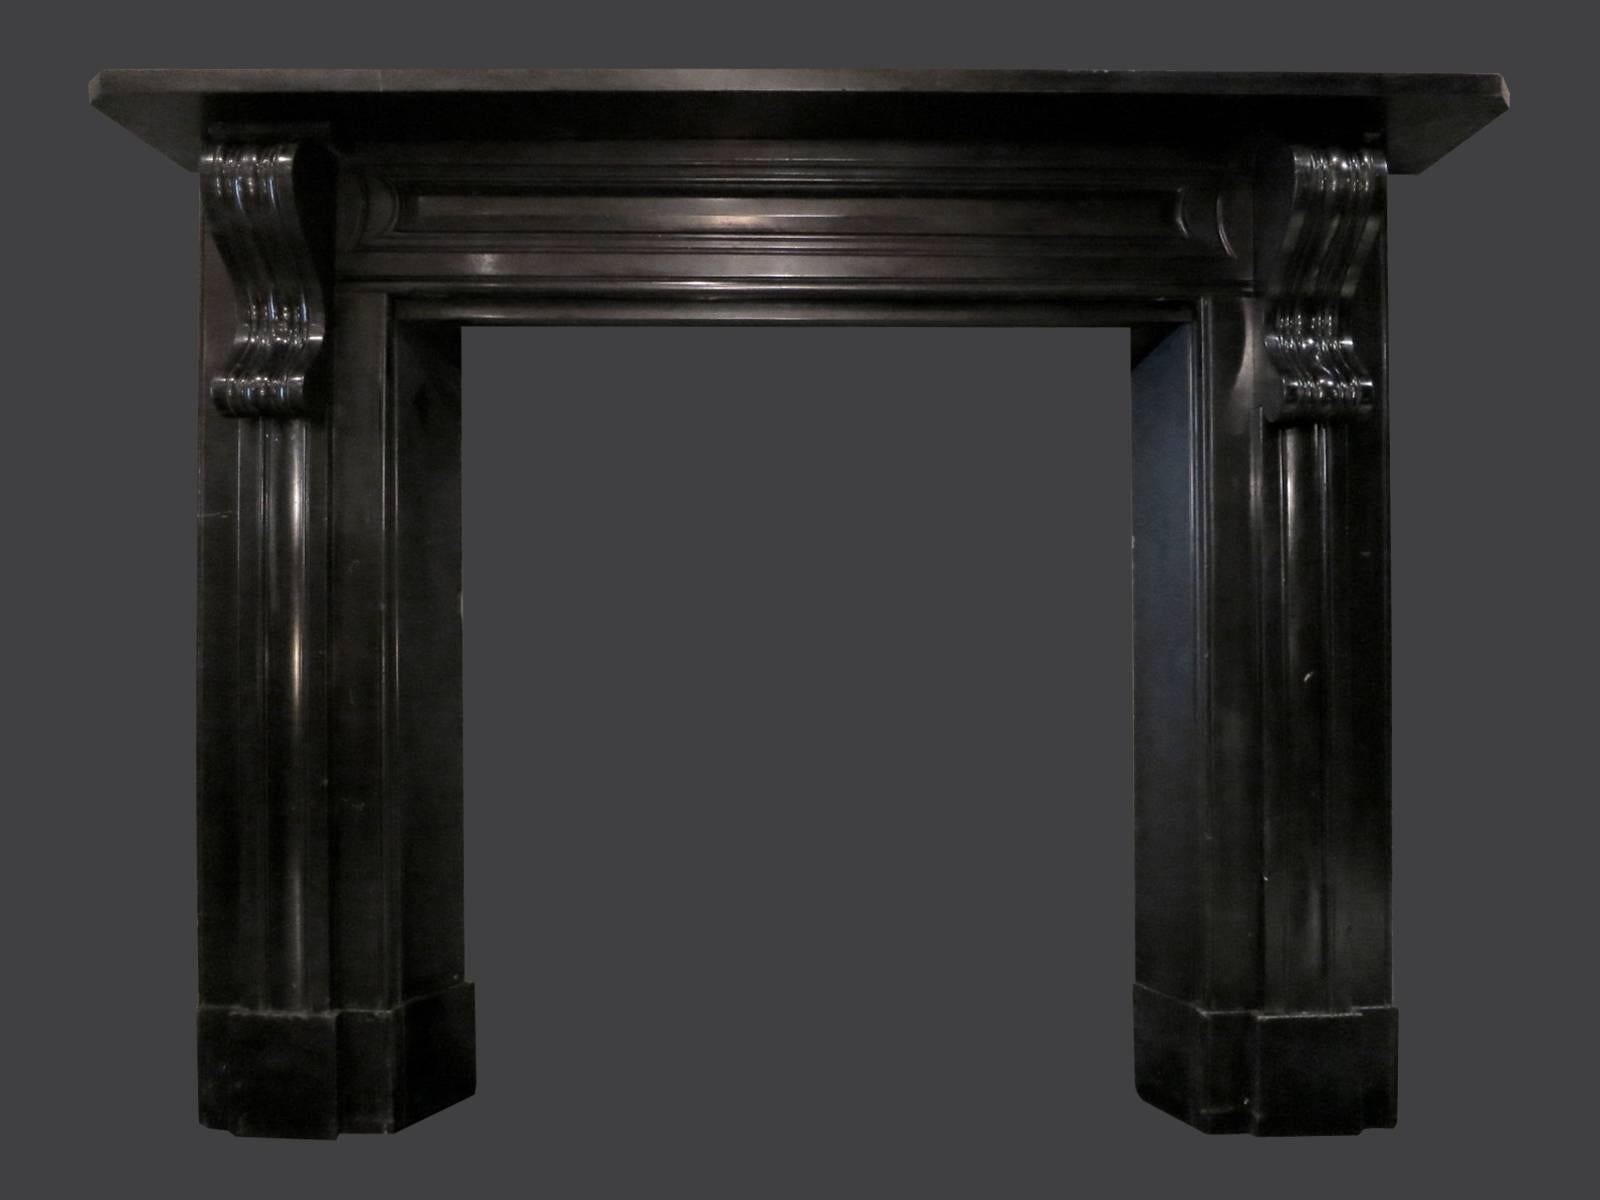 A large sophisticated mantel in black Kilkenny marble. From Rathvilly, County Carlow. The jambs with moulded panels and large deeply carved Irish Corbels, supported on separate foot blocks. The inverted inner slips being deeper than the outside